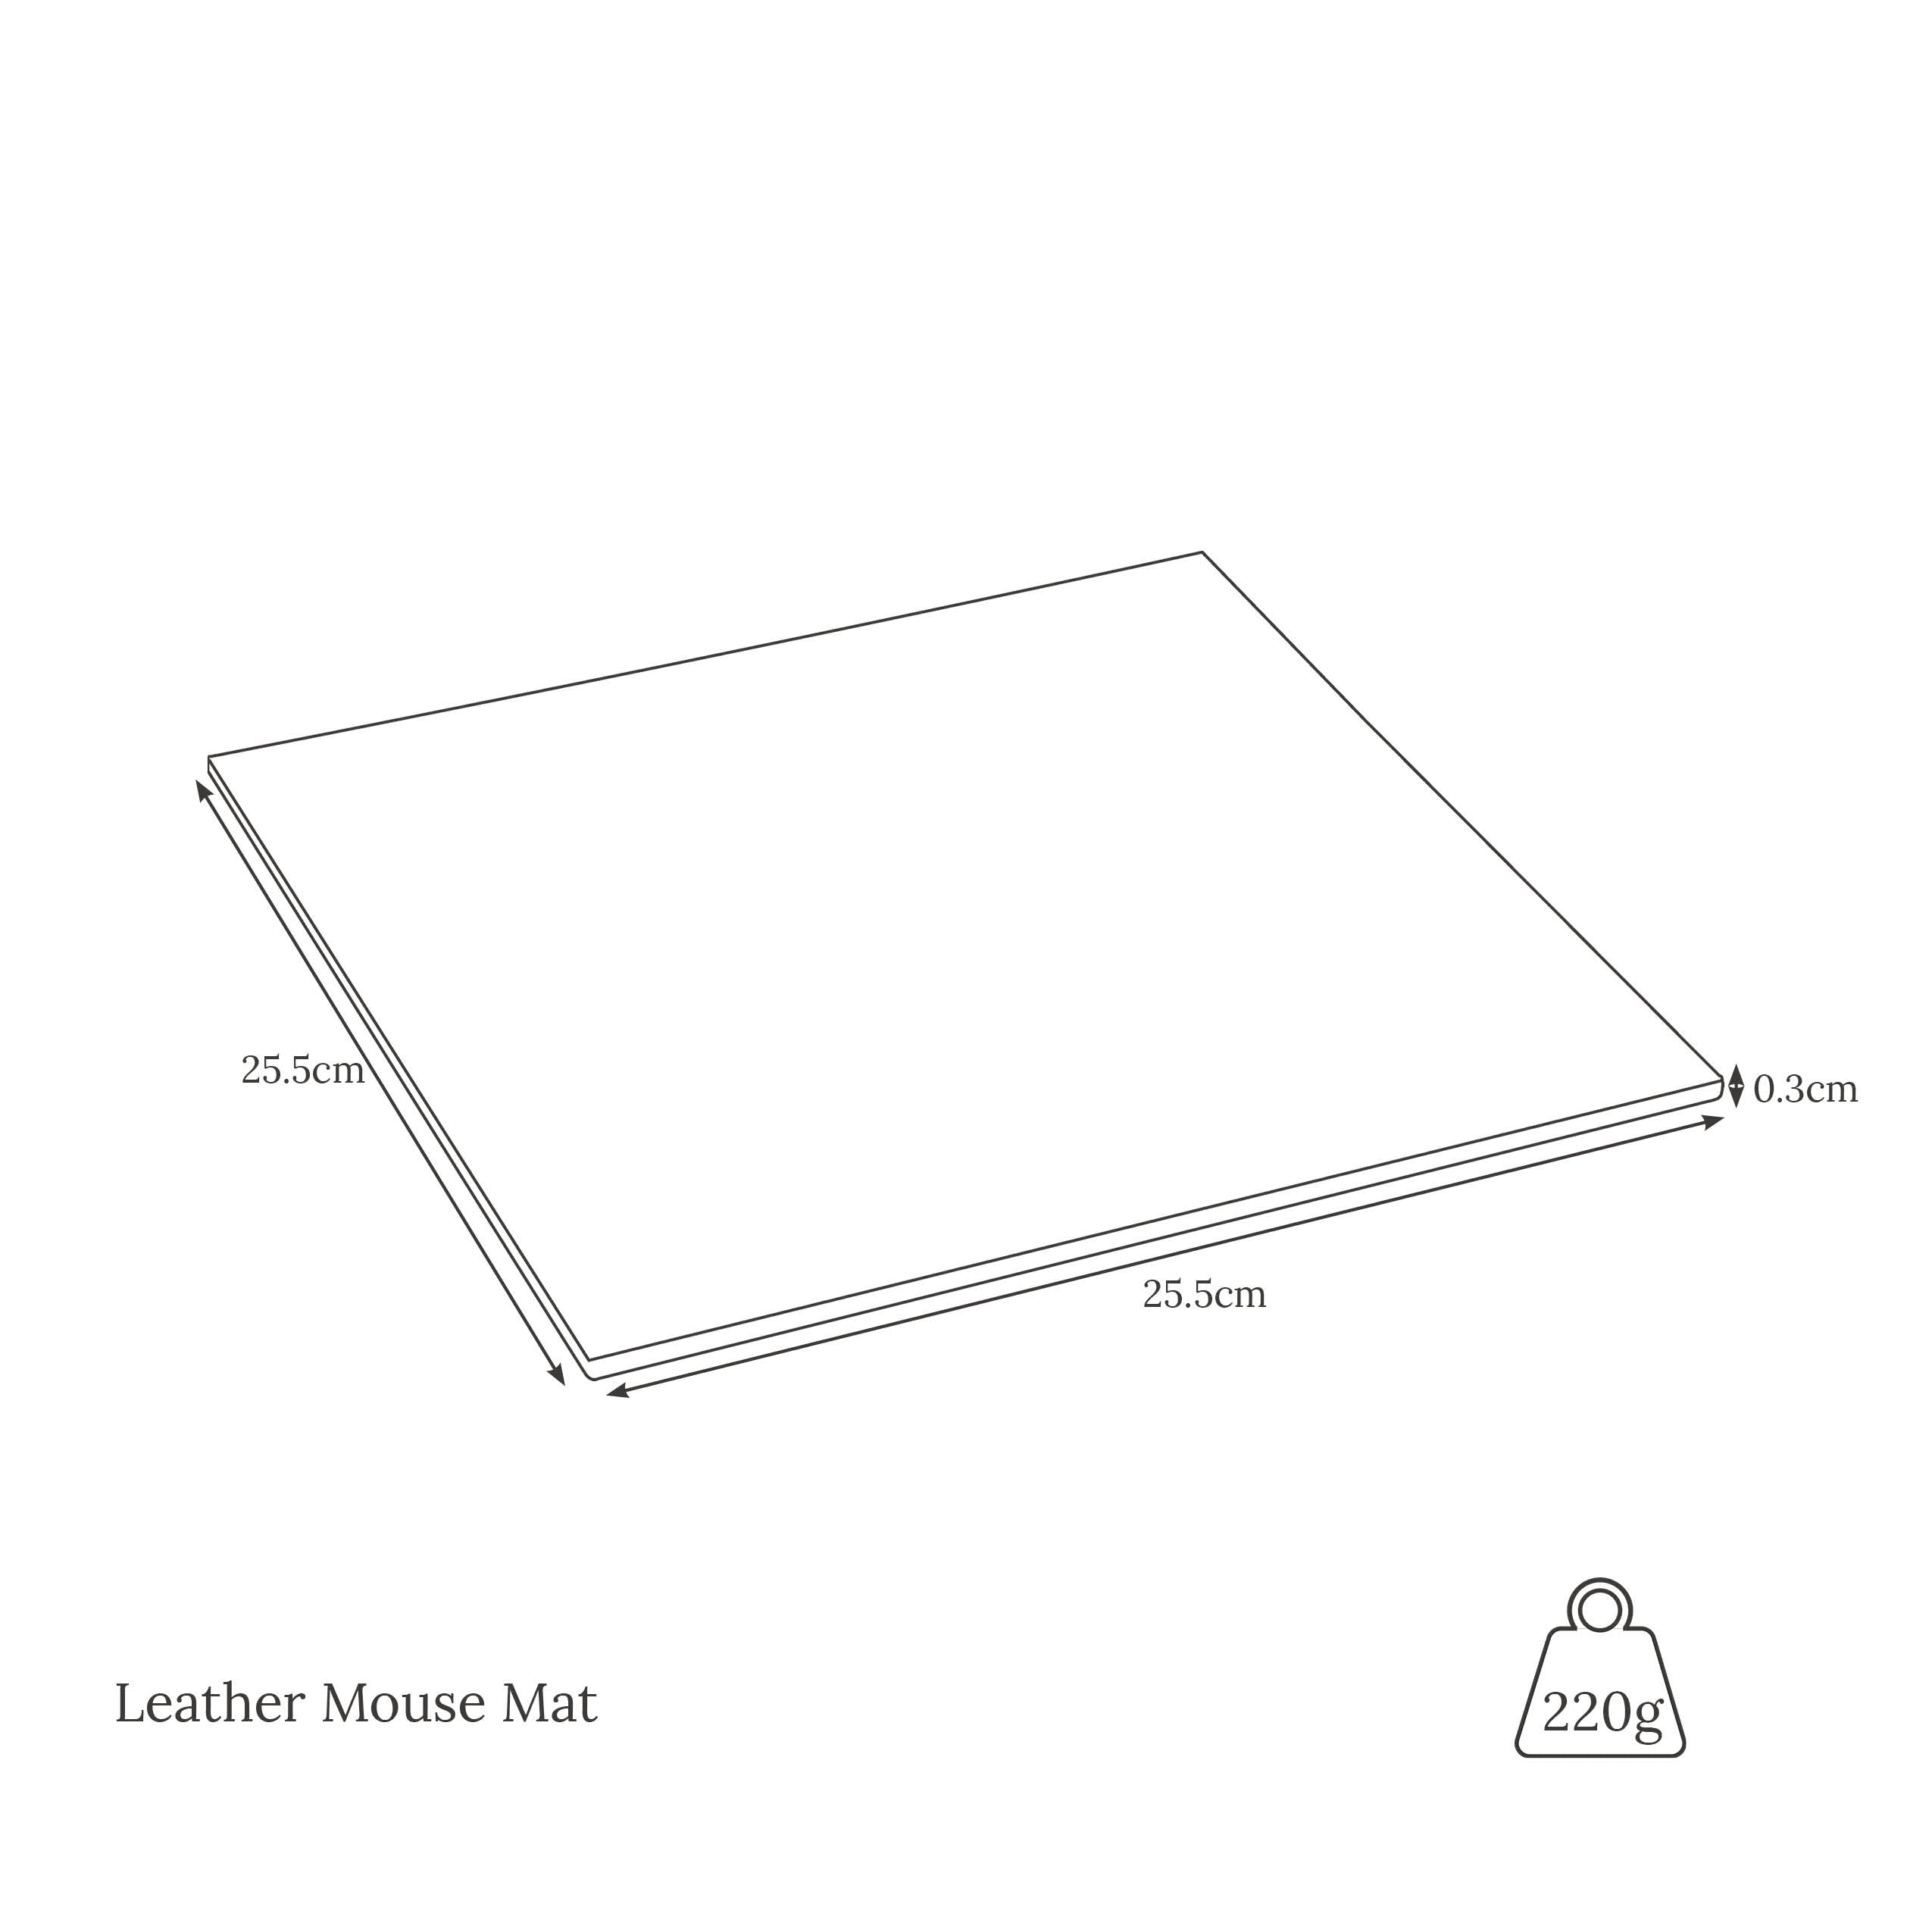 Line drawing of mouse mat weight and dimensions 